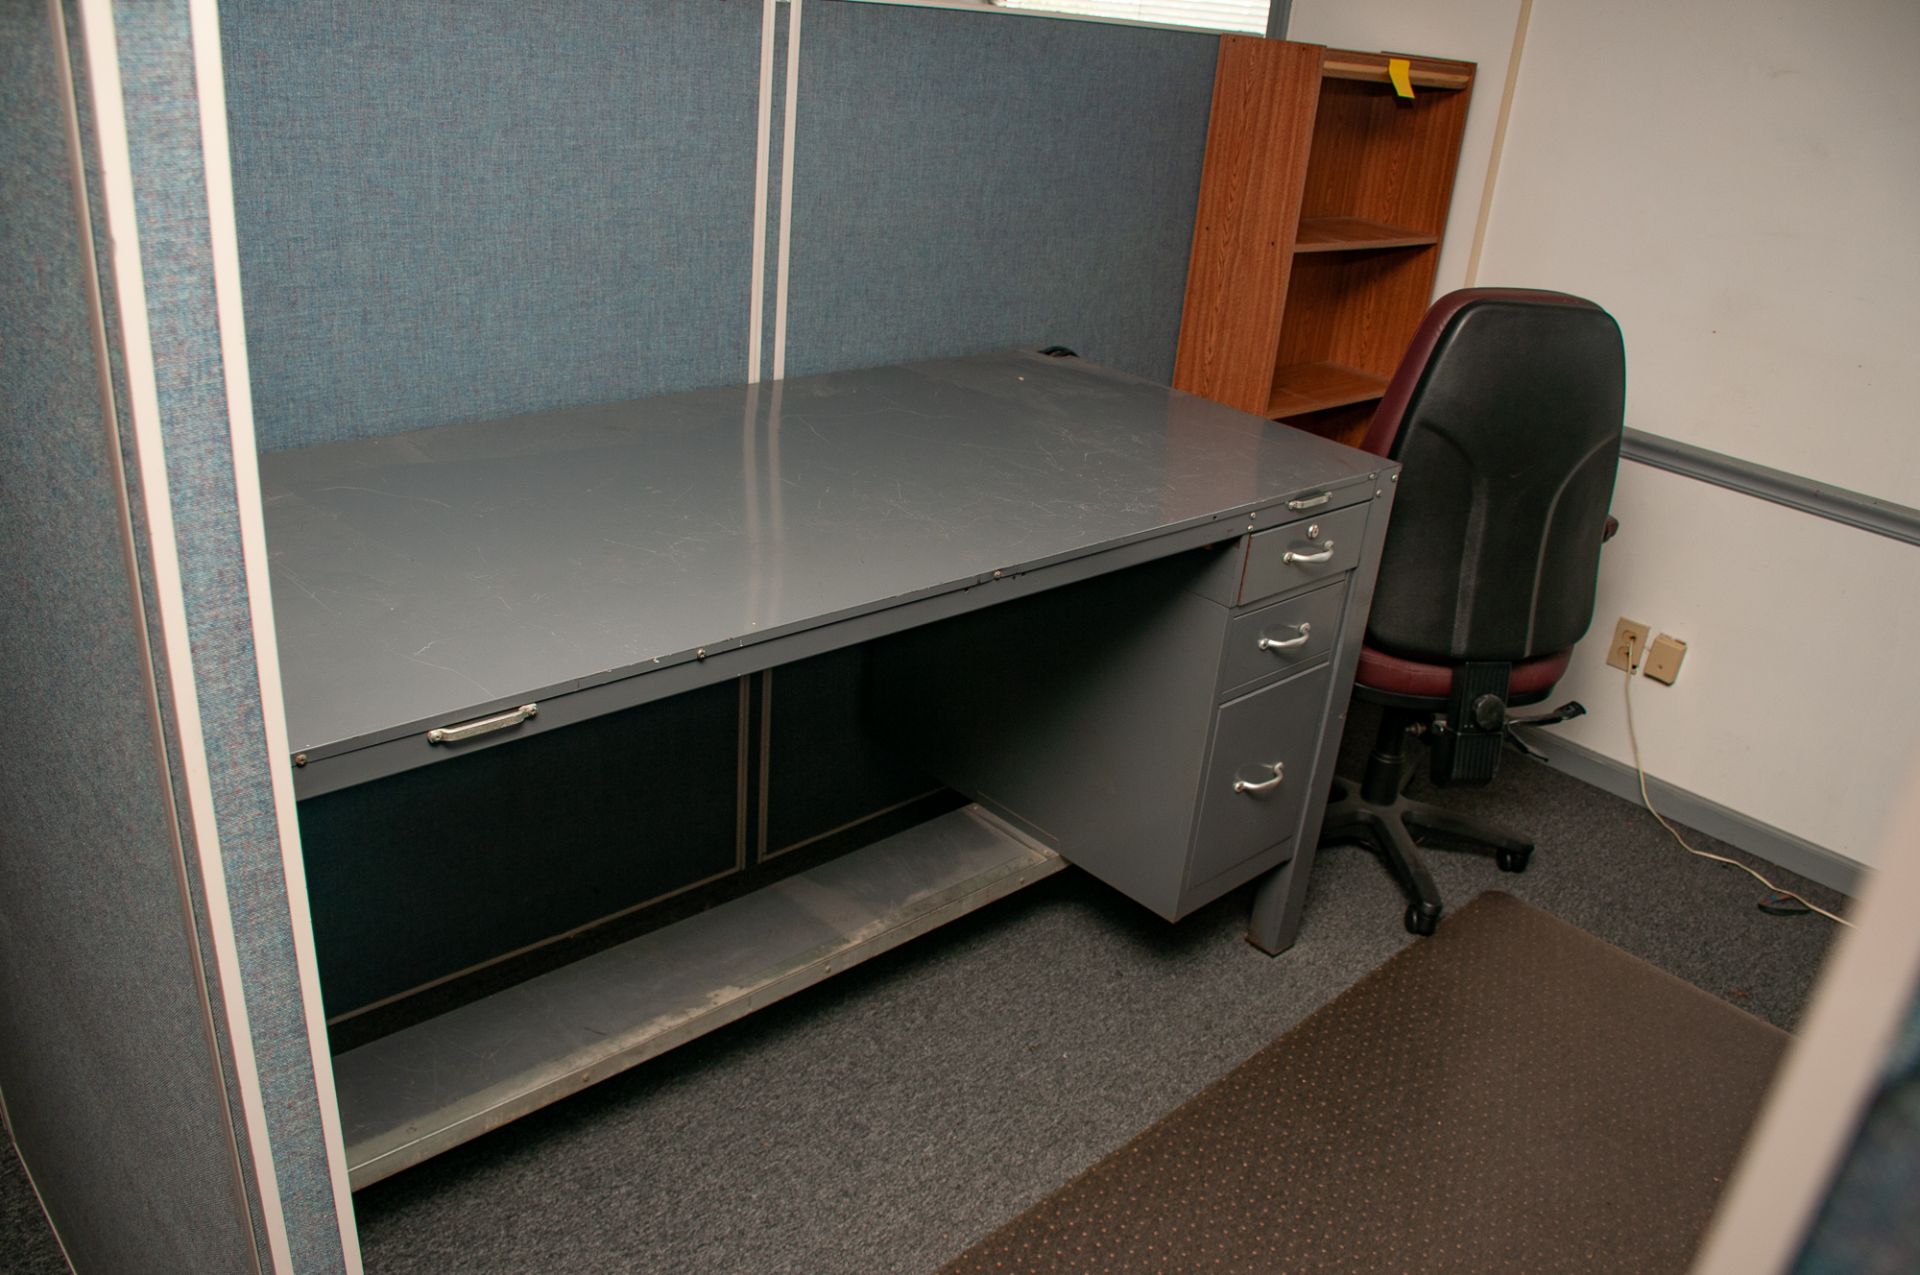 Office Furniture On Second Floor Front of Building, Microwave, Refridgerator, Desks Chairs, Filing C - Image 22 of 37